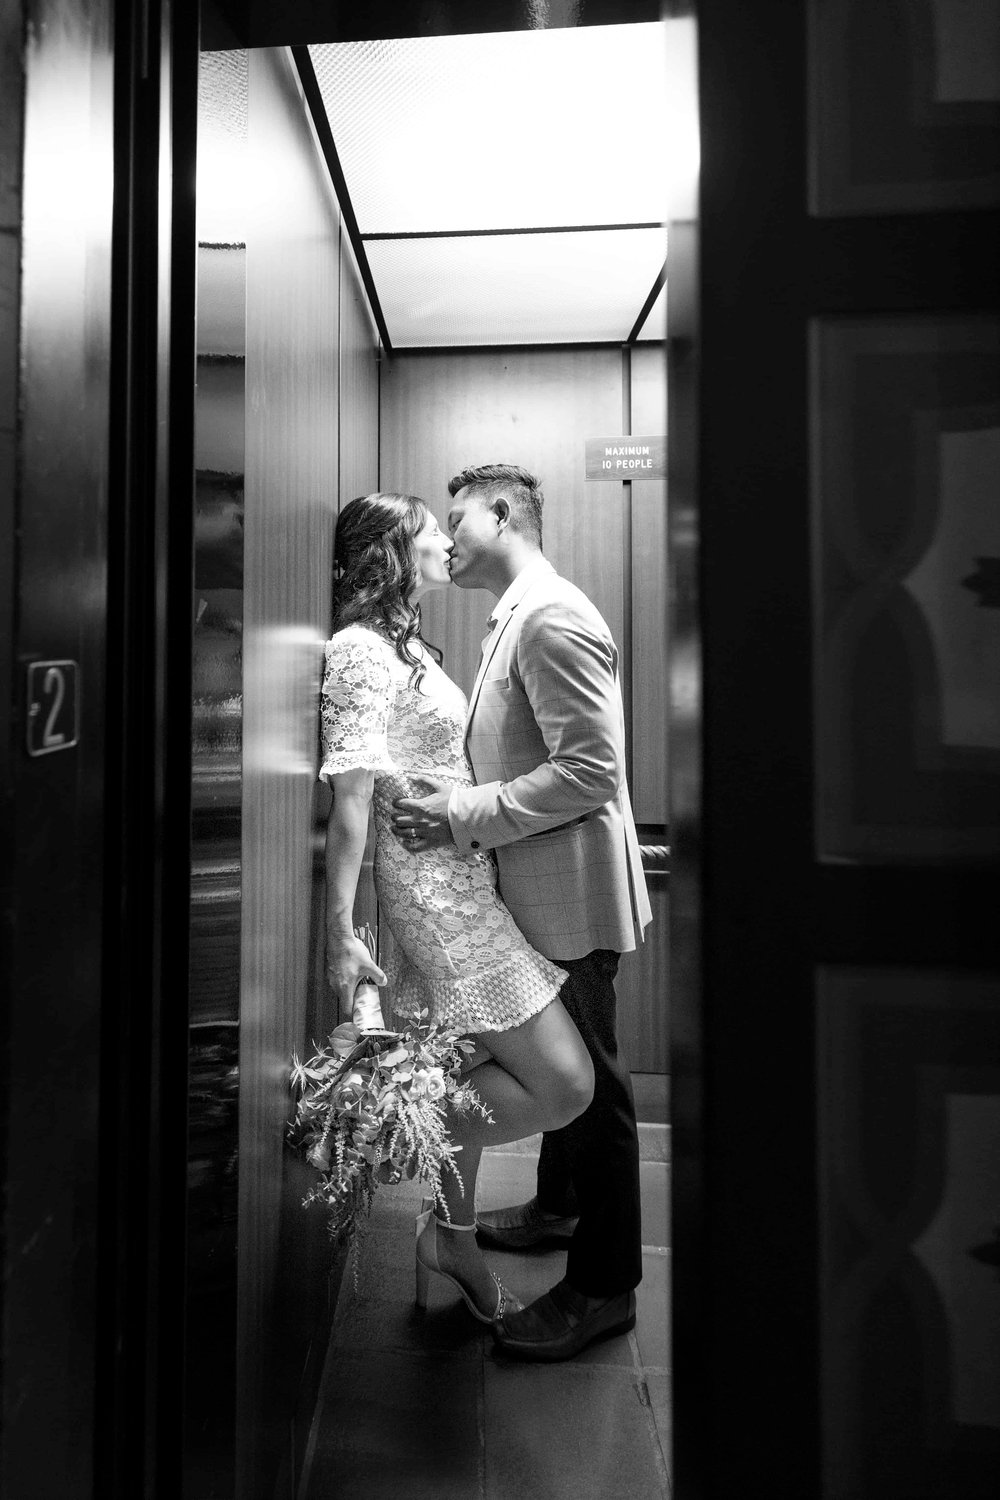 Bride and groom kissing in an elevator as the doors close